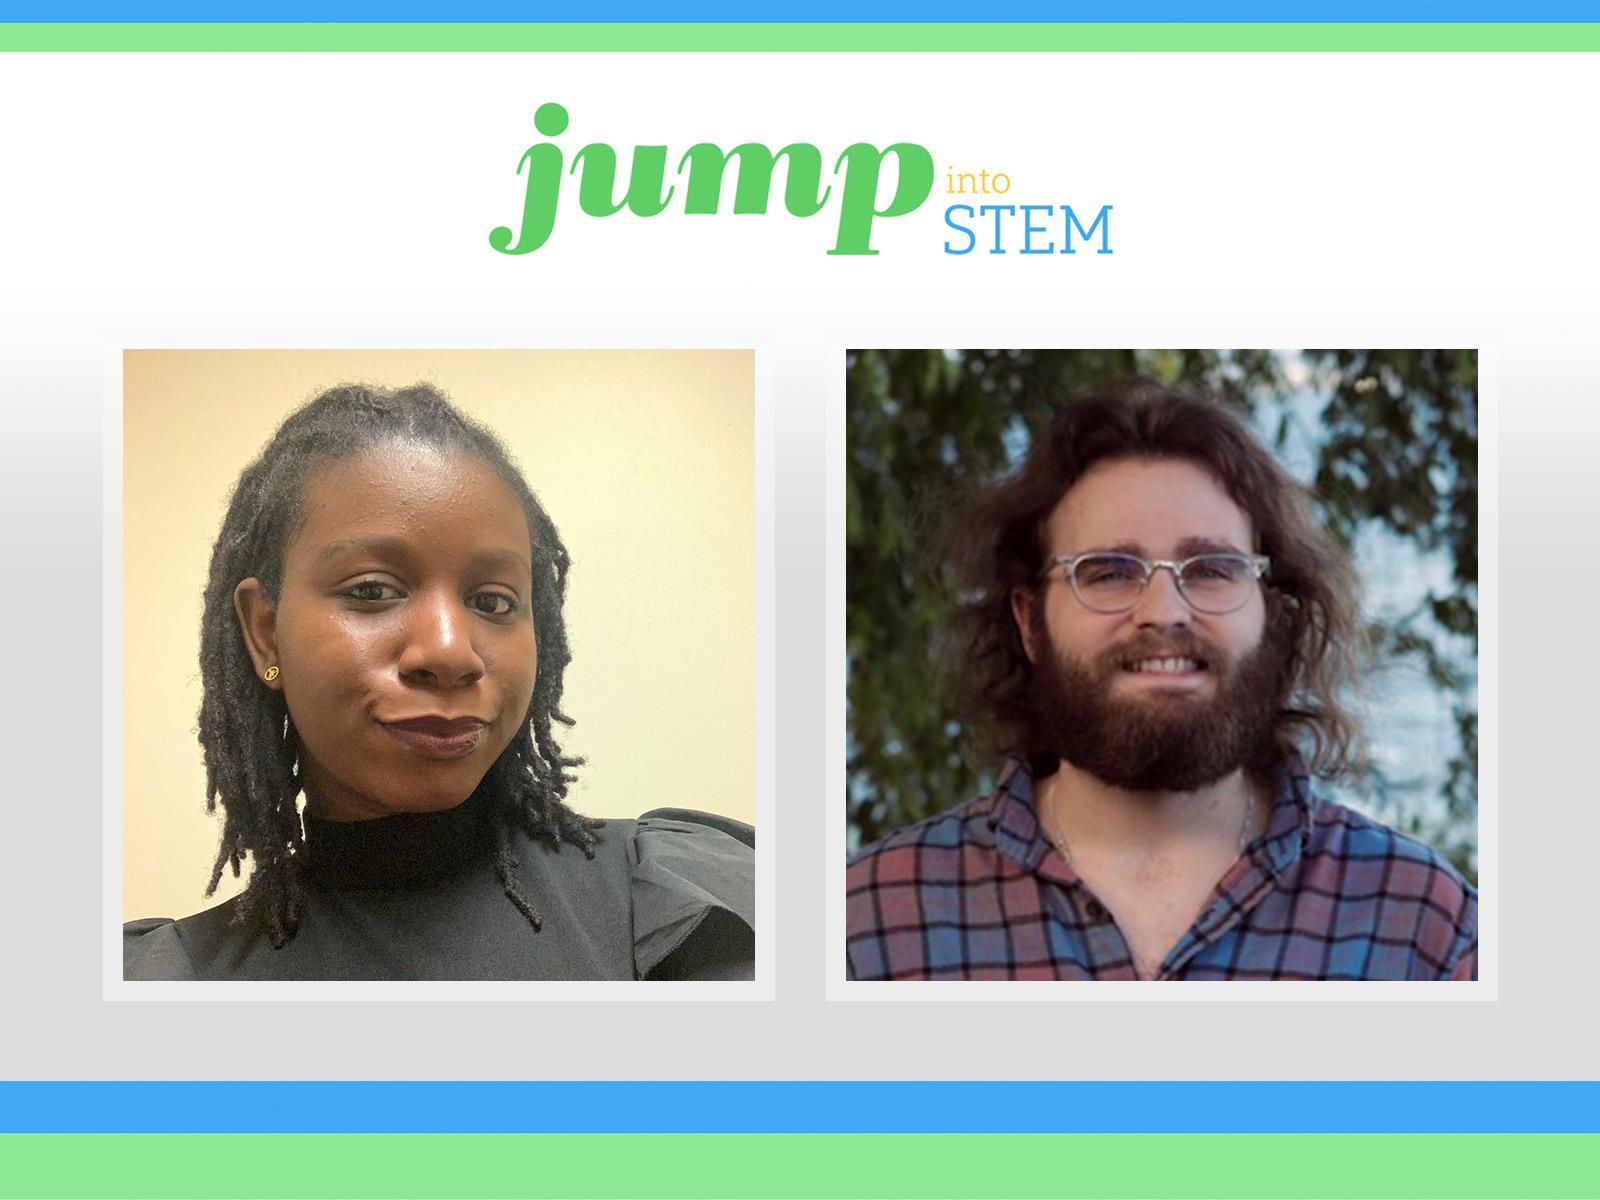 Collage of photos of two people, including the text "JUMP into STEM"